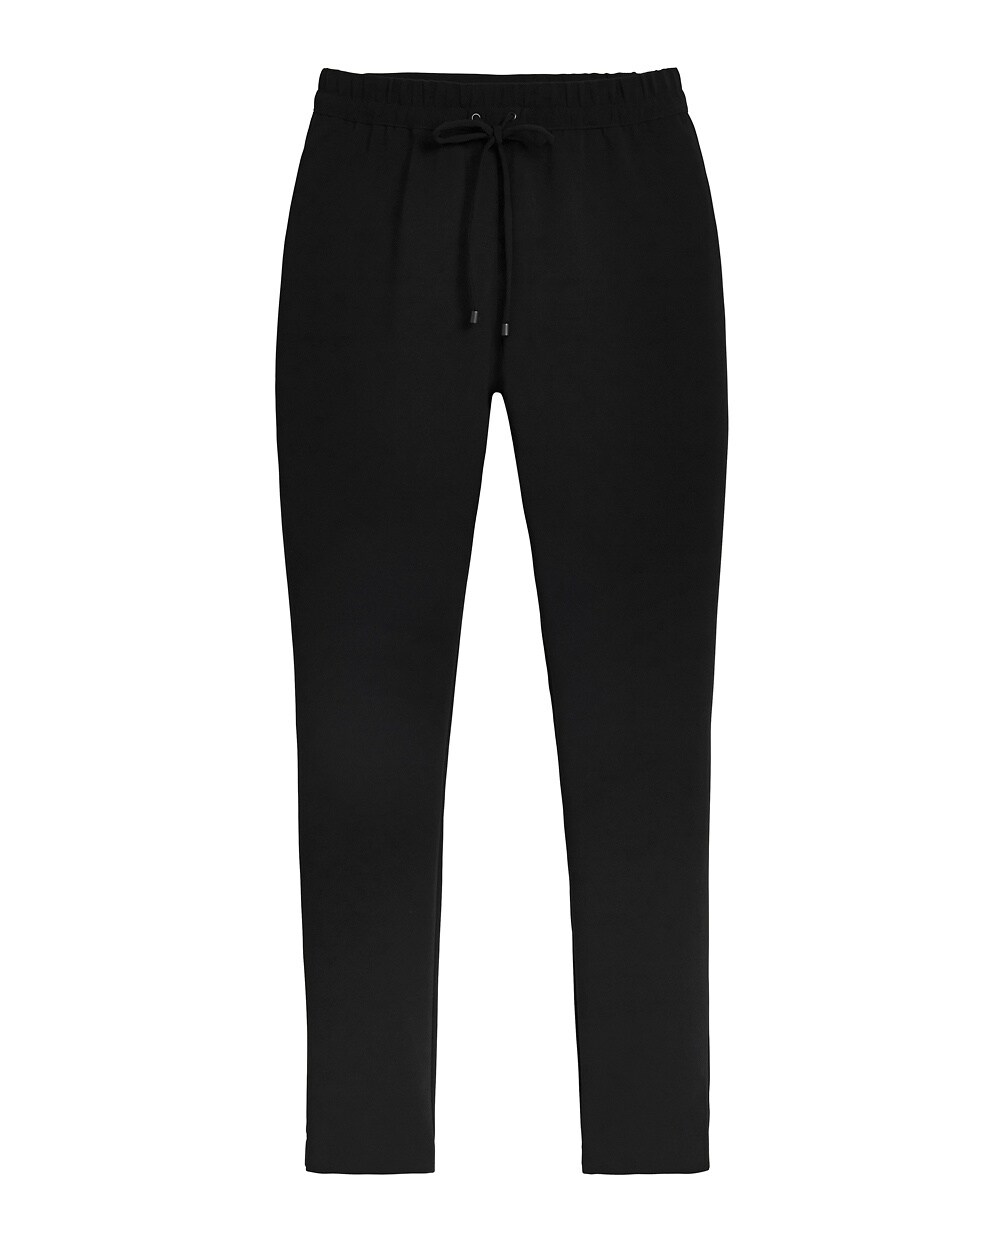 Clothing - Women's Black Label Collection - Chico's